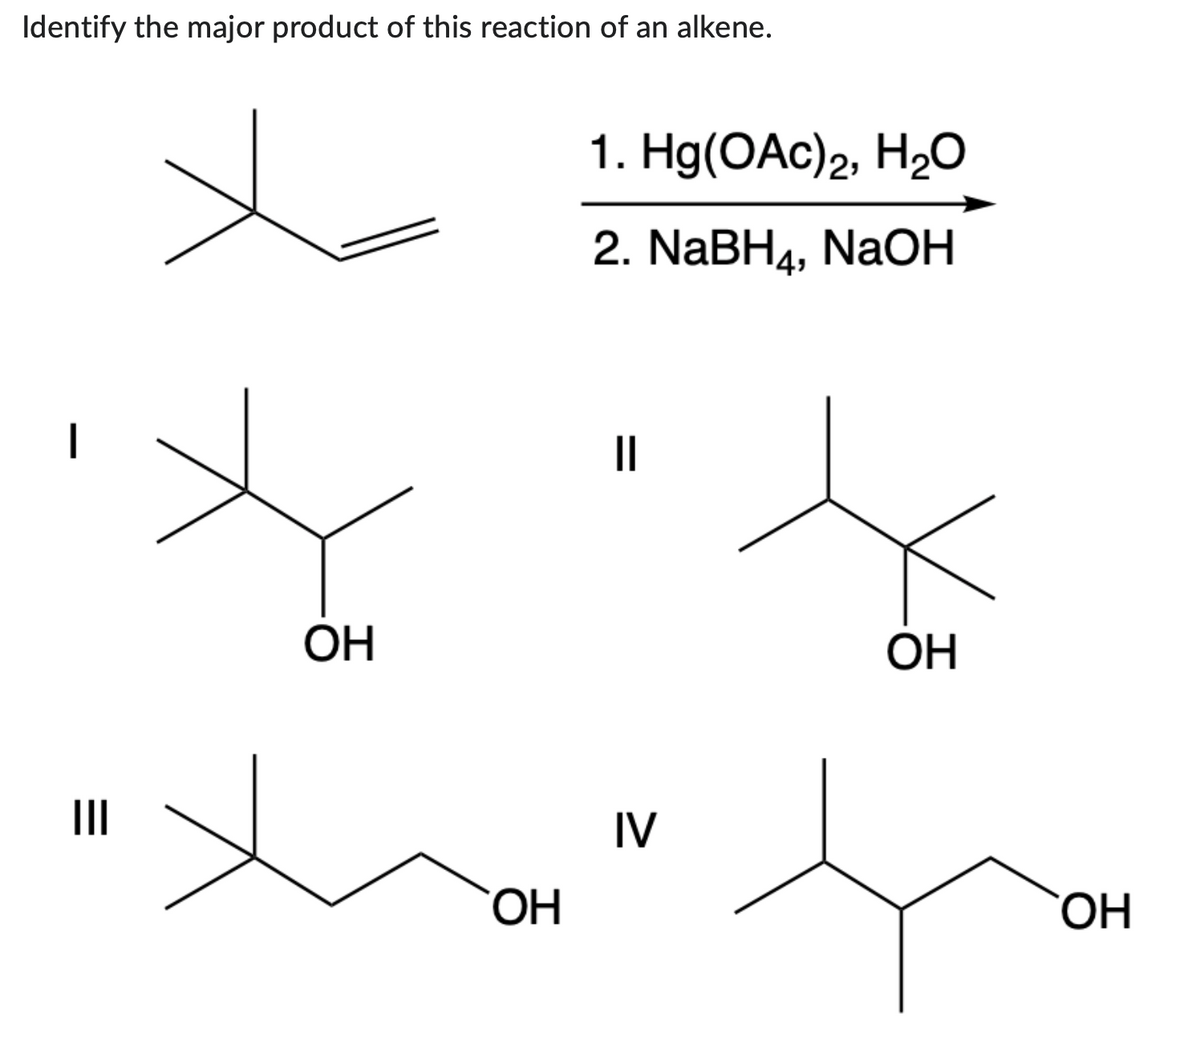 Identify the major product of this reaction of an alkene.
|
|||
OH
OH
1. Hg(OAc)2, H2O
2. NaBH4, NaOH
||
IV
ㅊ
OH
OH